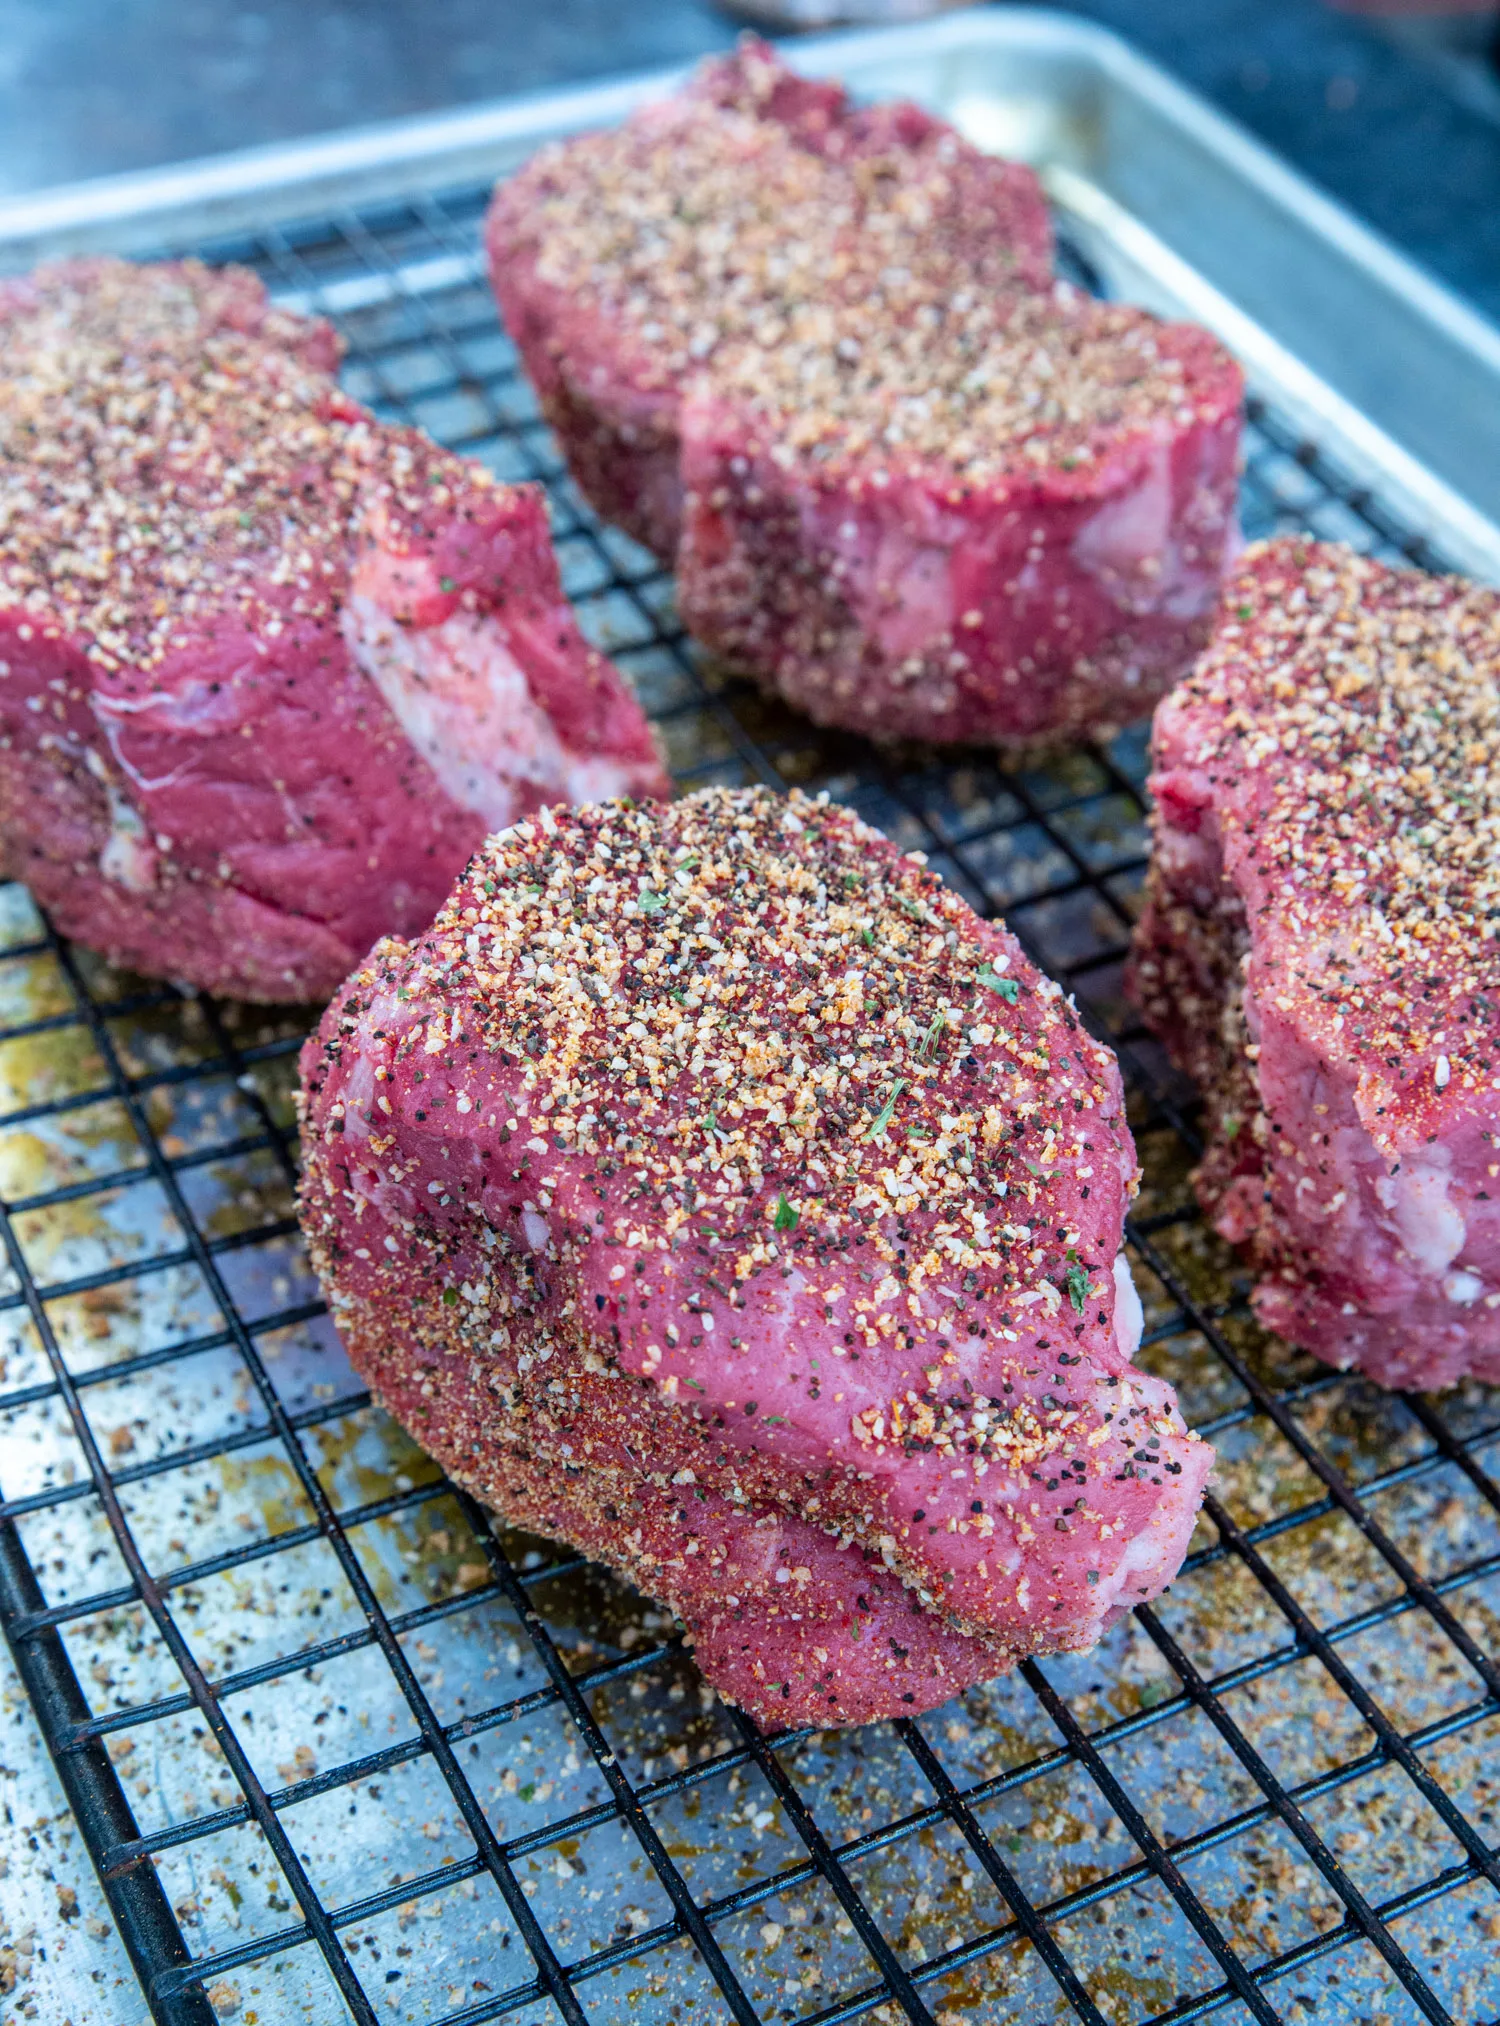 Filets prepped with steakhouse seasoning